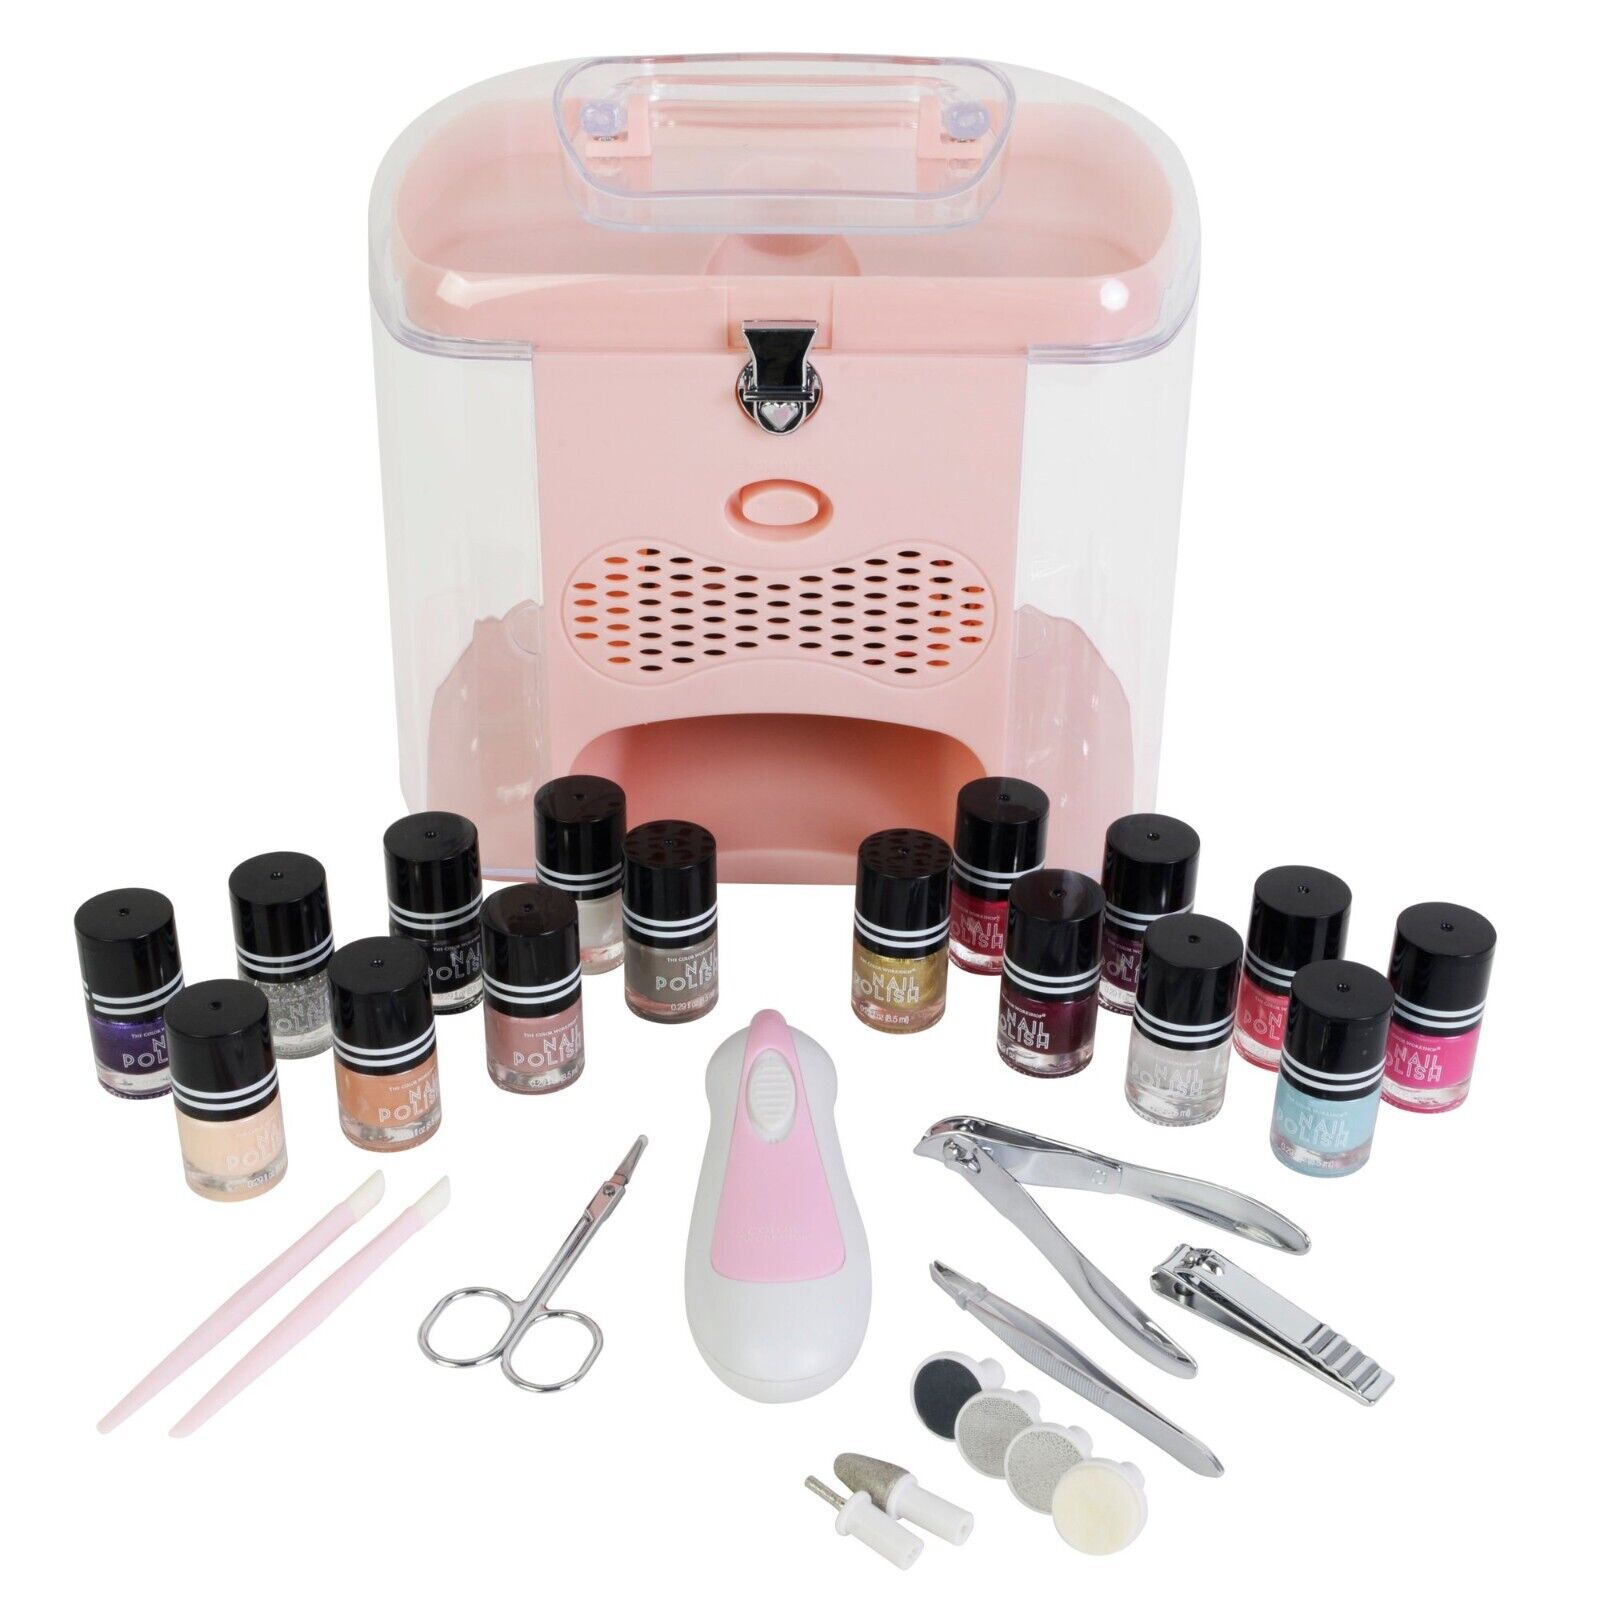 The Color Workshop 30-Piece Nail Polish Gift Set with Nail Dryer, Pink  19333804148 | eBay